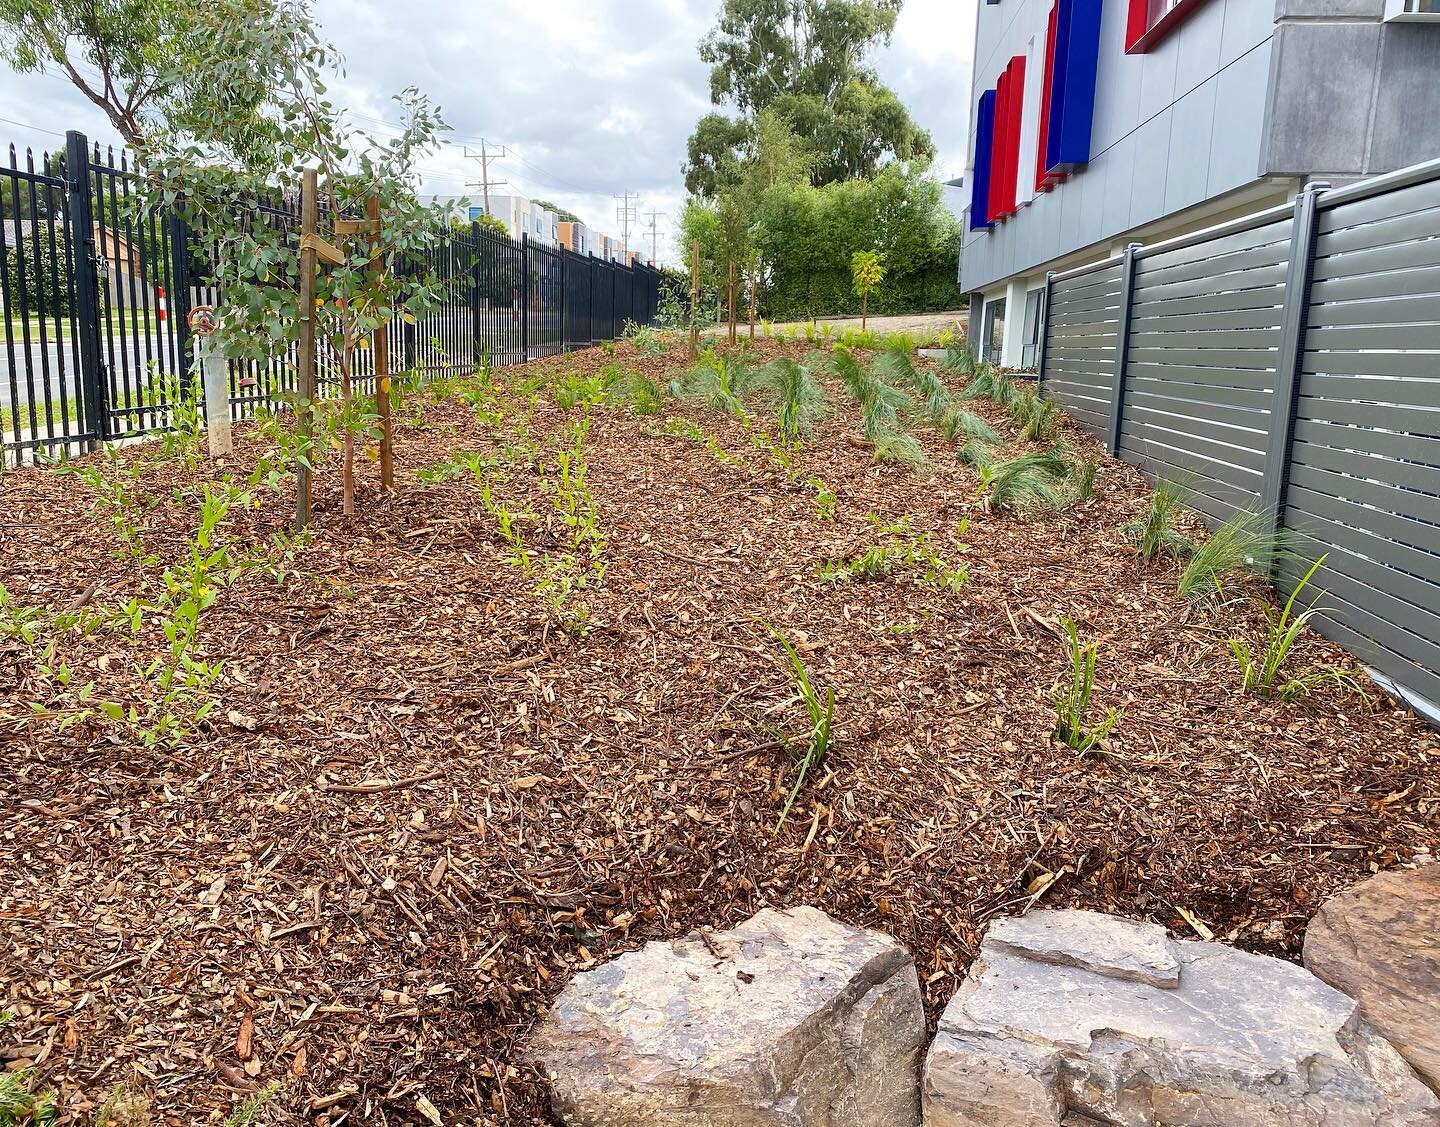 St Andrews Christian College front landscaping 🌿🌱
Plants supplied by @plantmark 🙌
Irrigation supplied by @smartwatershop 💦 .
#hydroseed #plants #irrigation #rocks #colourbond #screen #melbourne #landscape #school